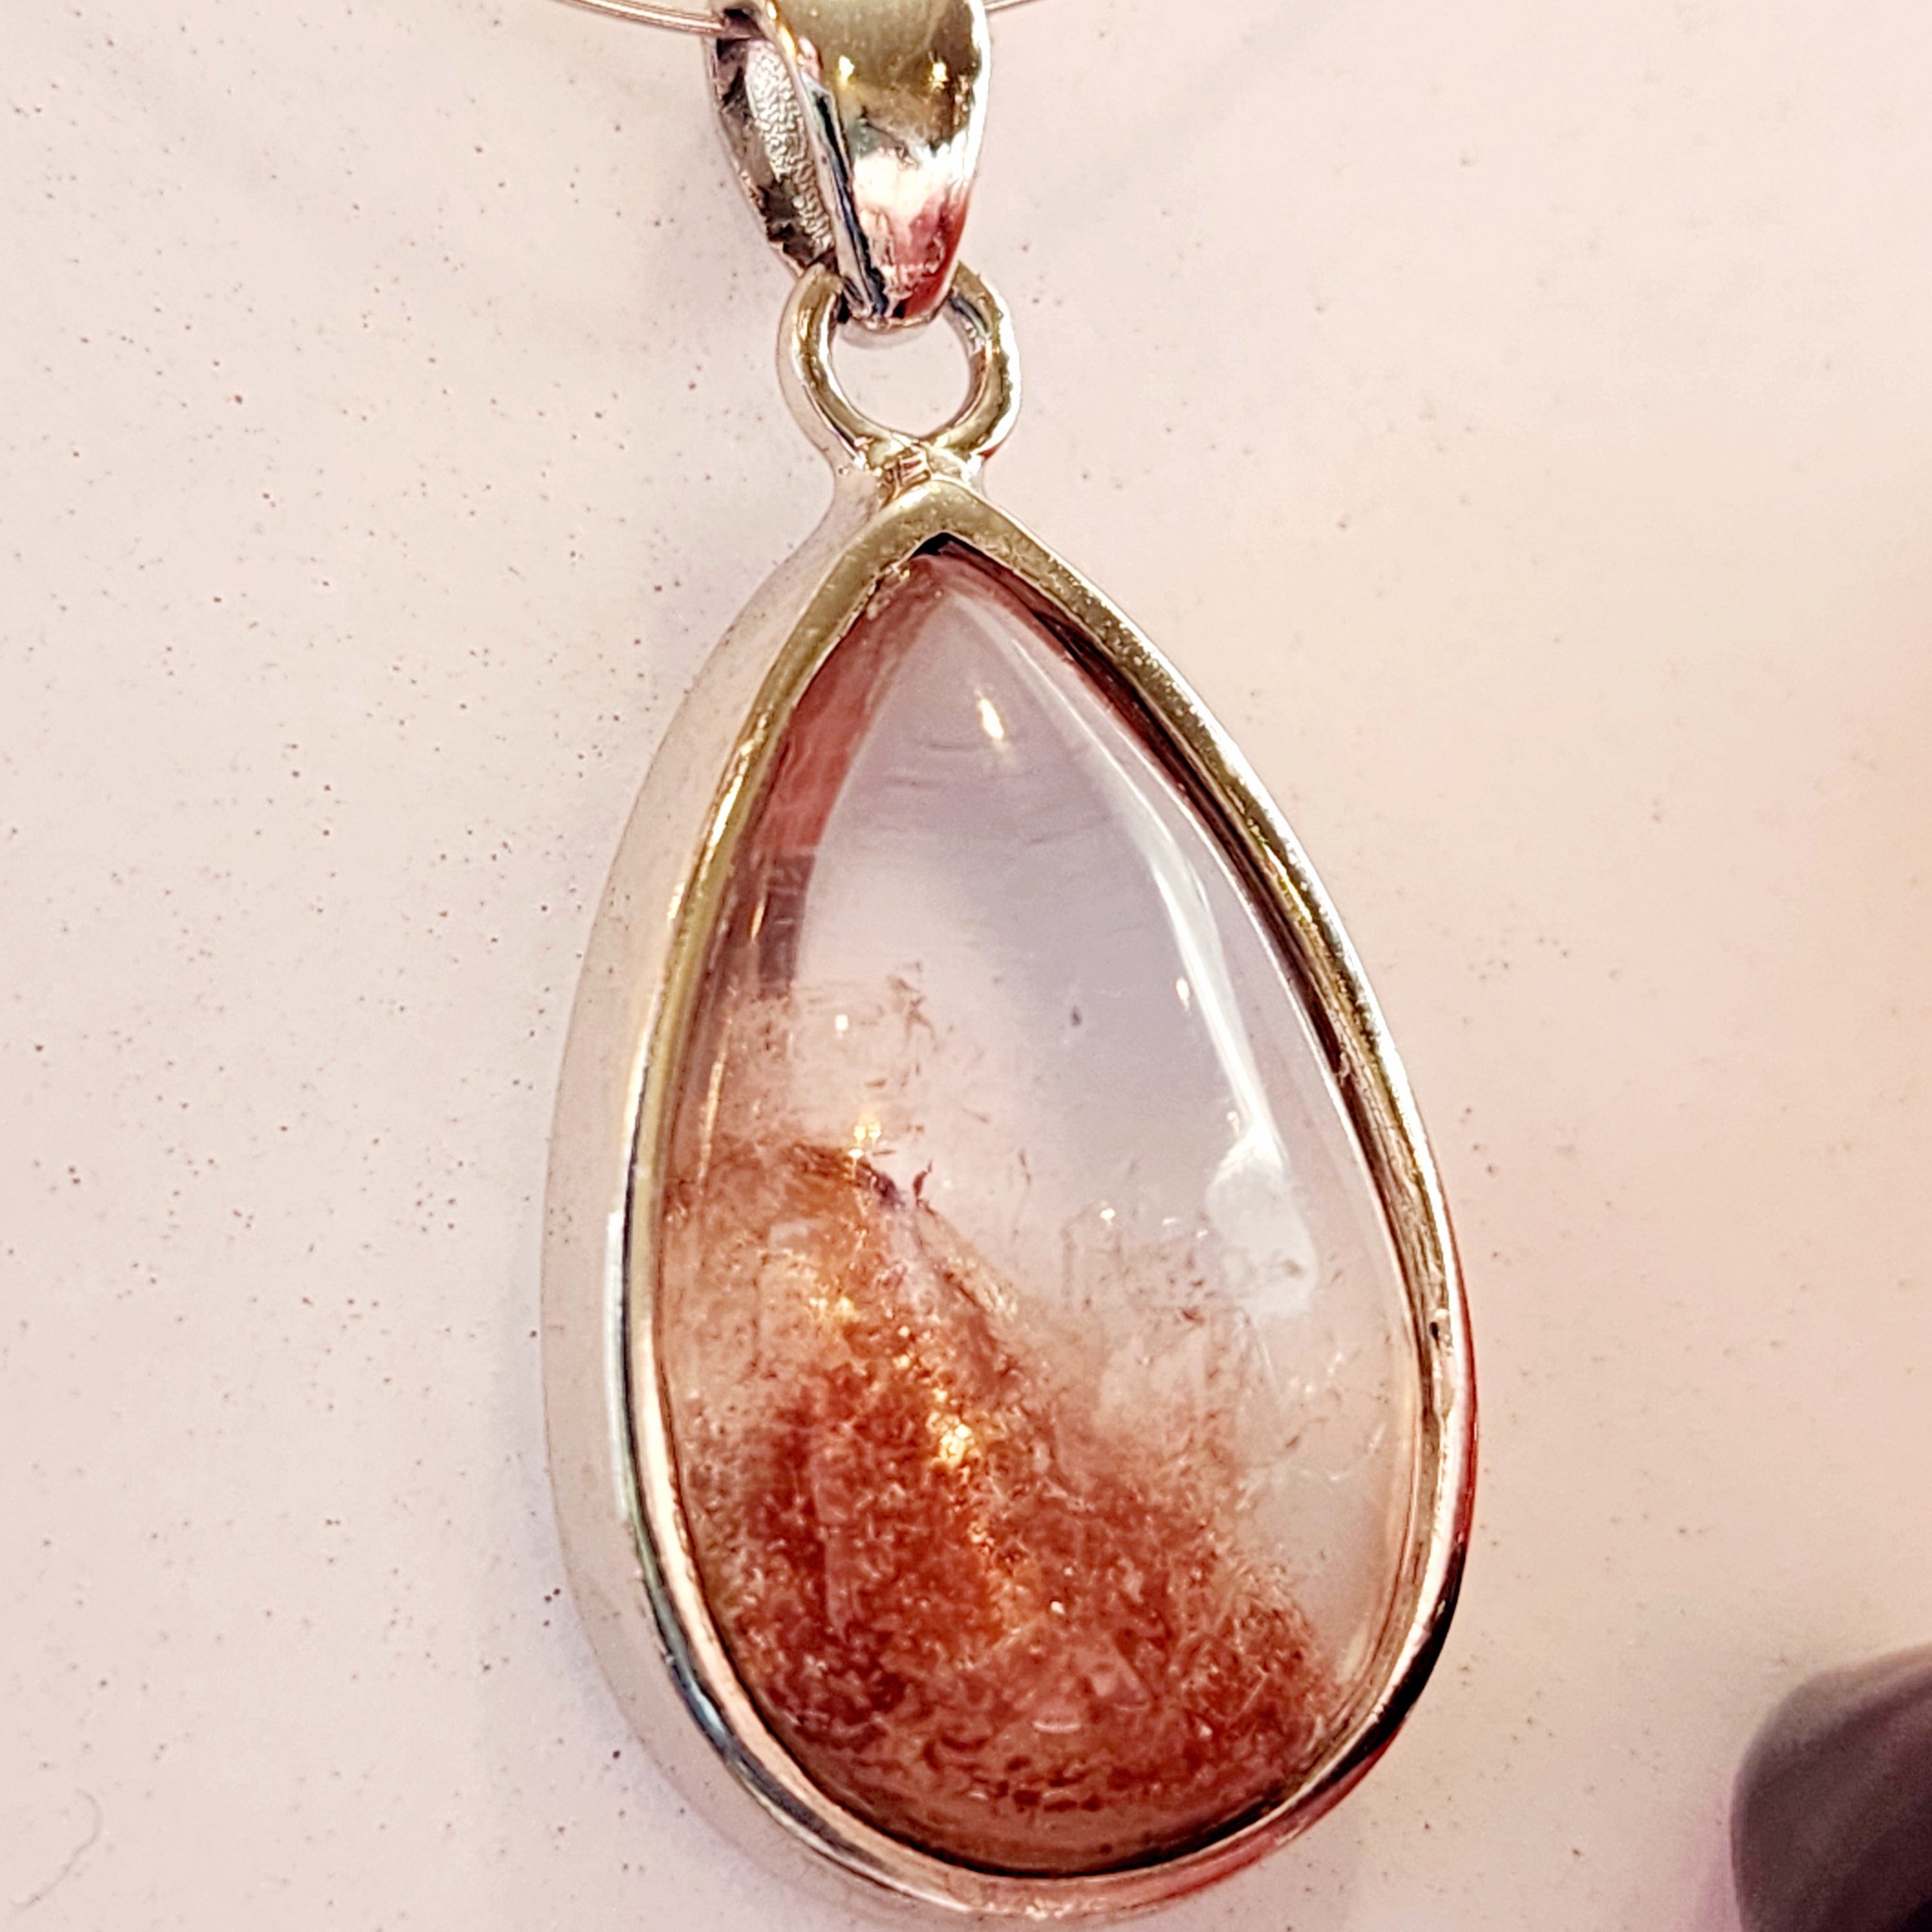 Lepidocrocite Phantom in Quartz Pendant .925 Silver for Healthy Relationships and Opening your Heart to Love